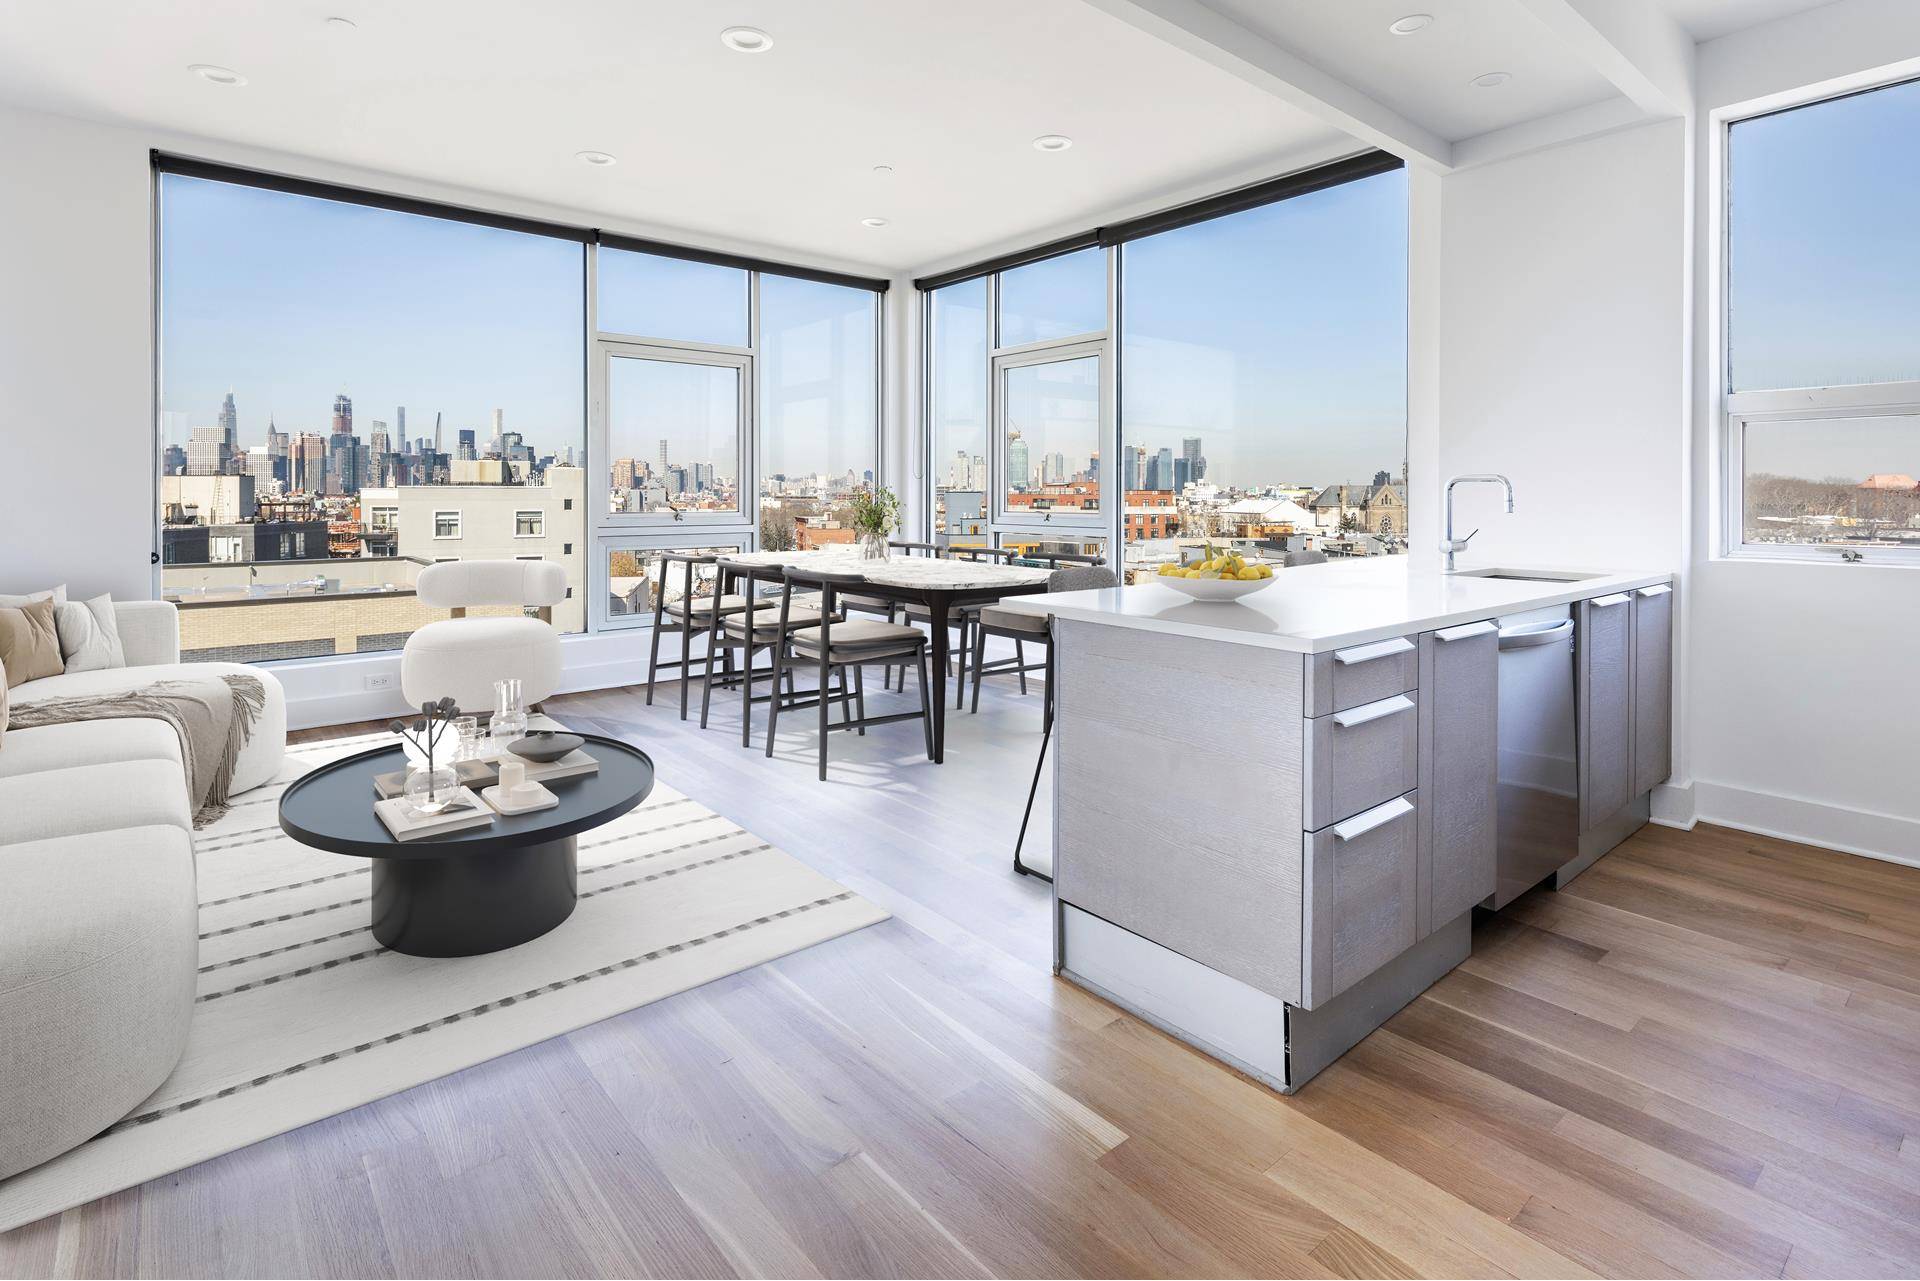 Apartment 7A at 128 Newton Street is a sun blasted top floor, corner 2BR 2Bath unit with 975sf balcony and panoramic views of Williamsburg and the full Manhattan skyline.